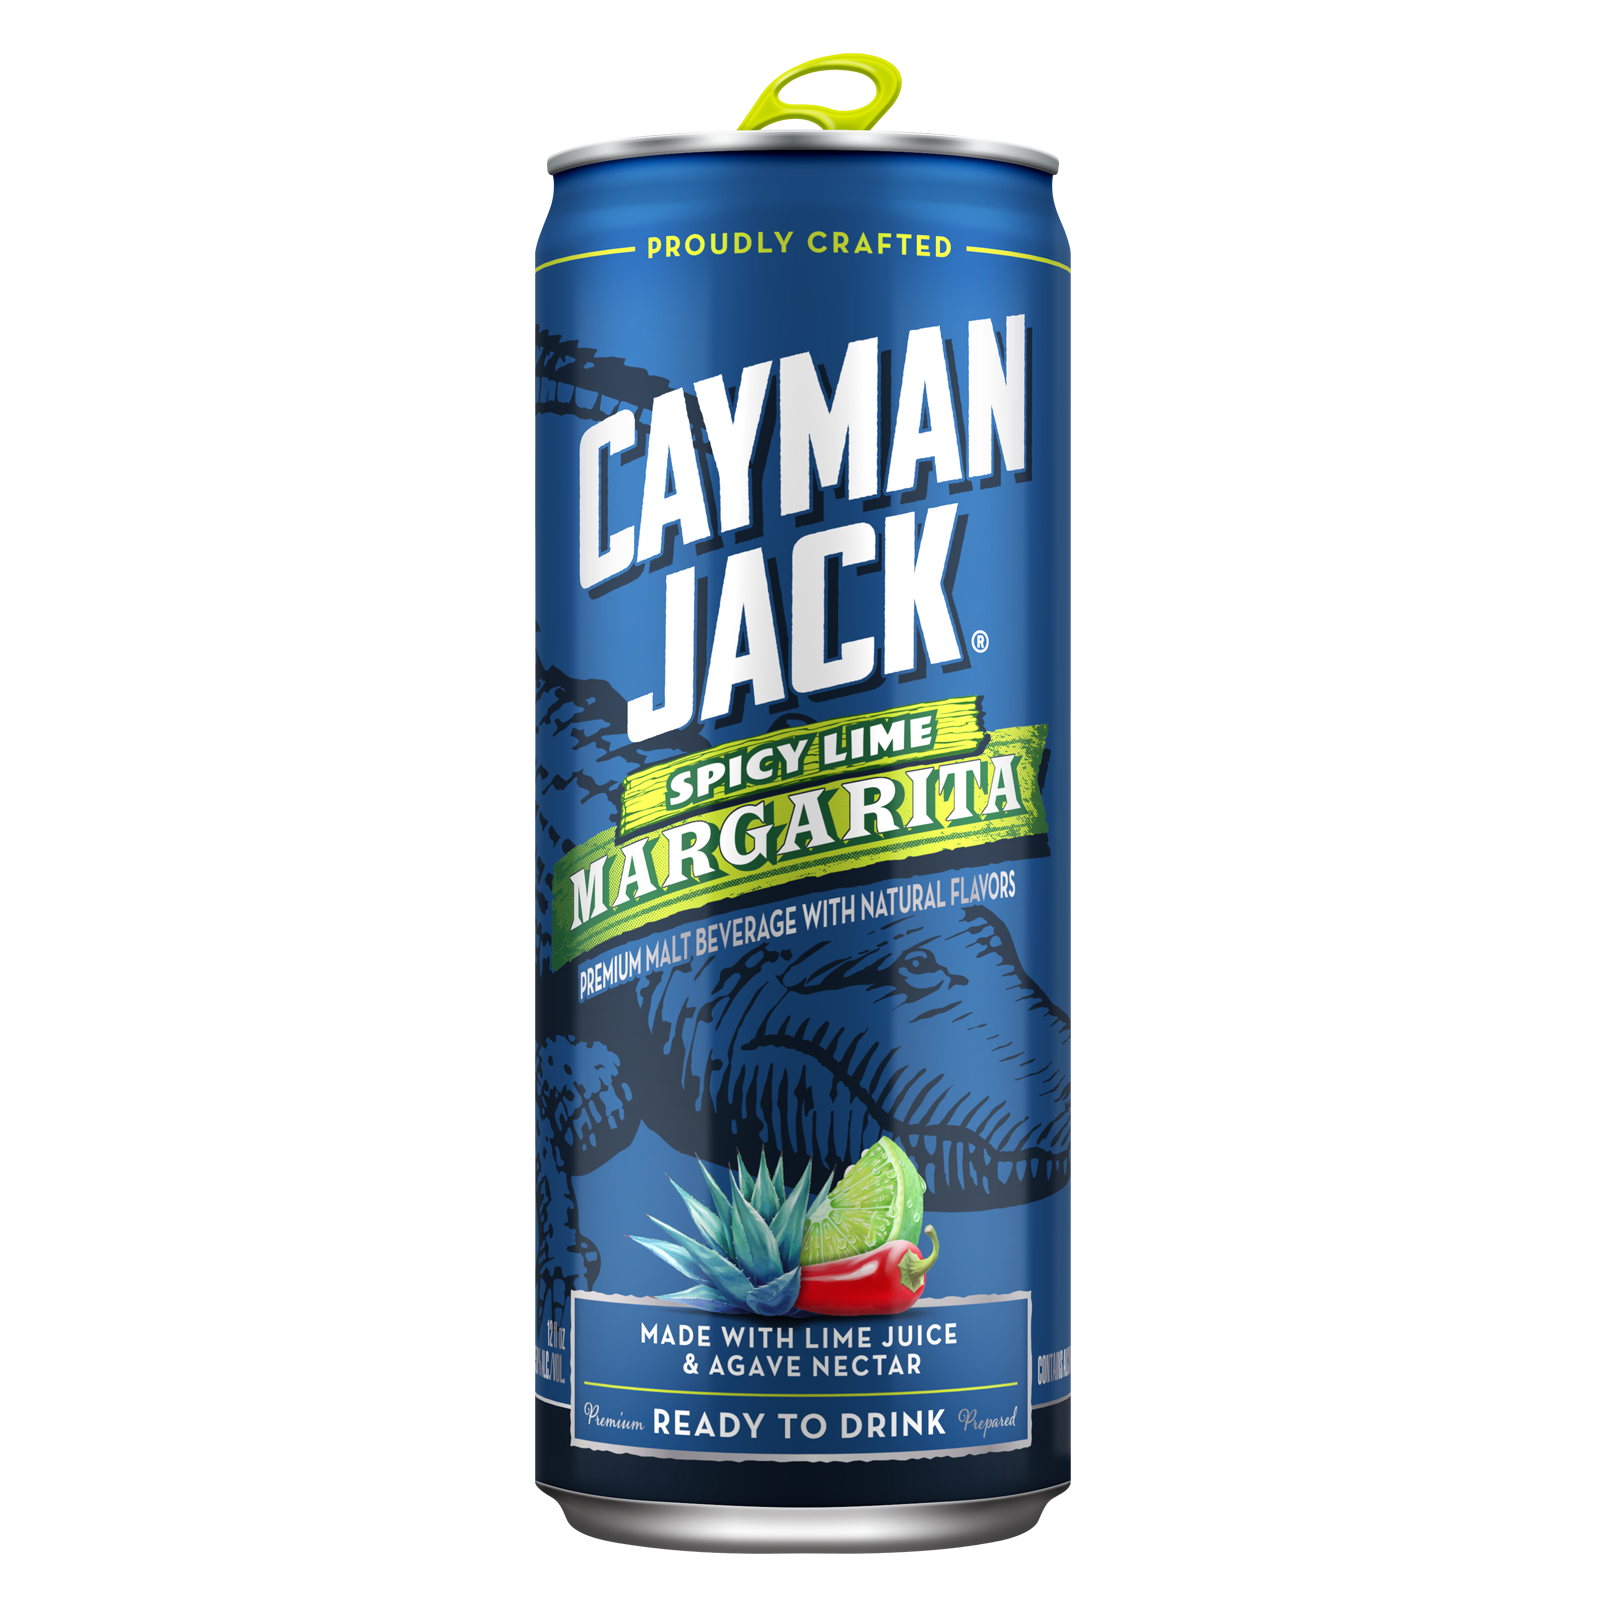 Cayman Jack Spicy Lime Single 12oz Can 5.8% ABV